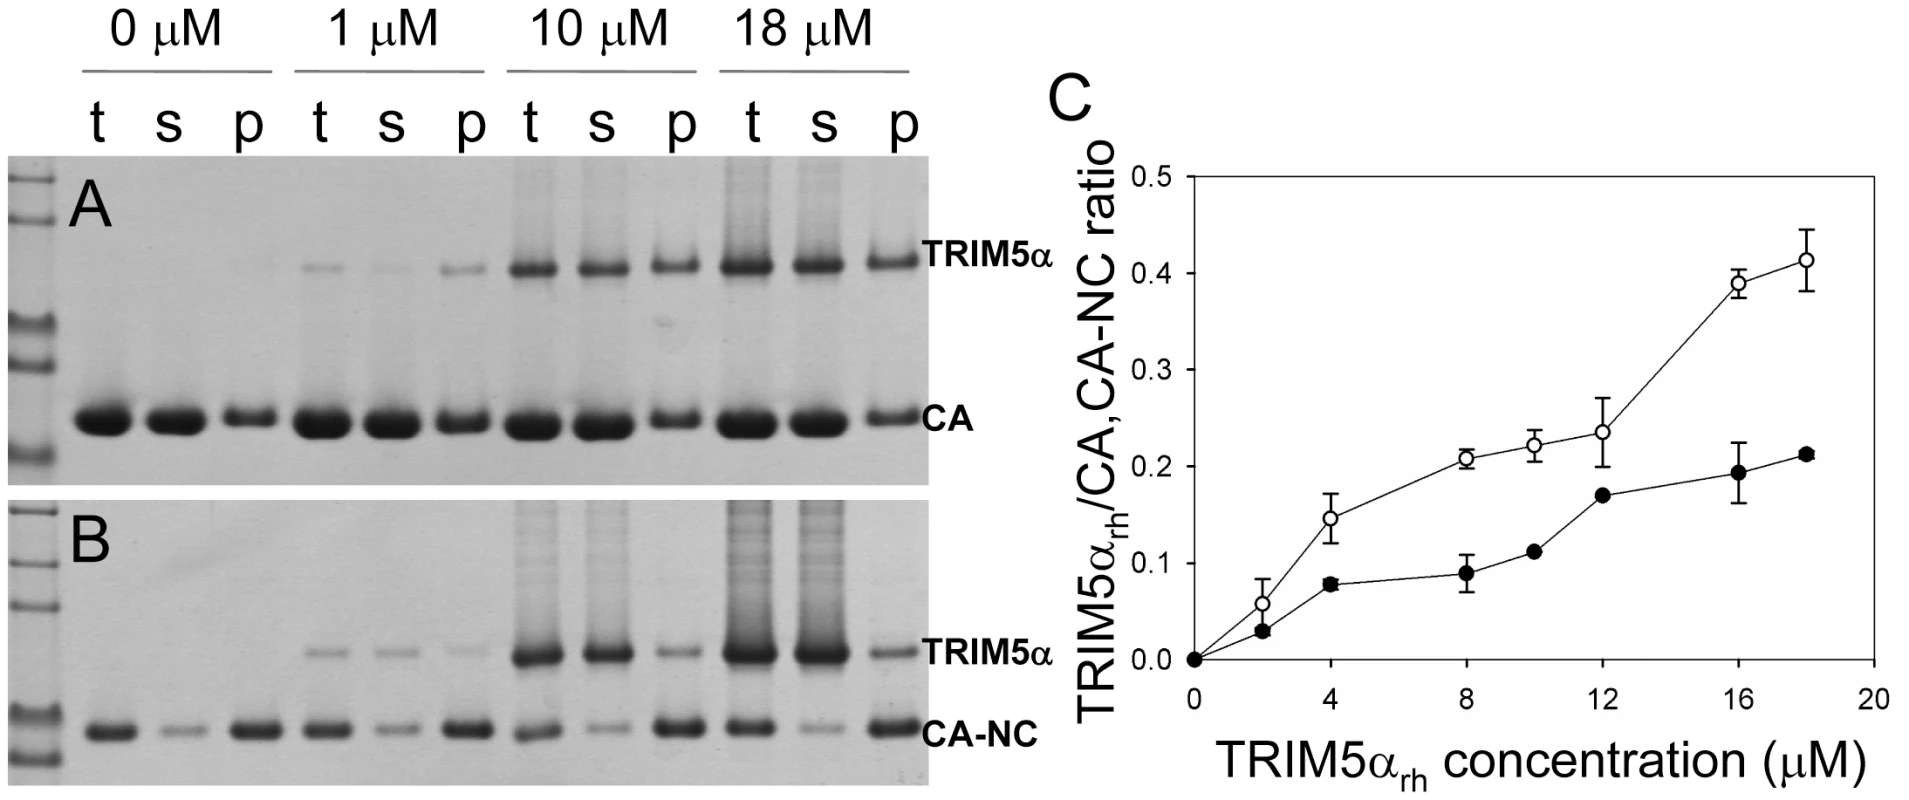 Analysis of TRIM5α<sub>rh</sub> CC-SPRY binding to the assembly of wild-type CA and CA-NC tubes.